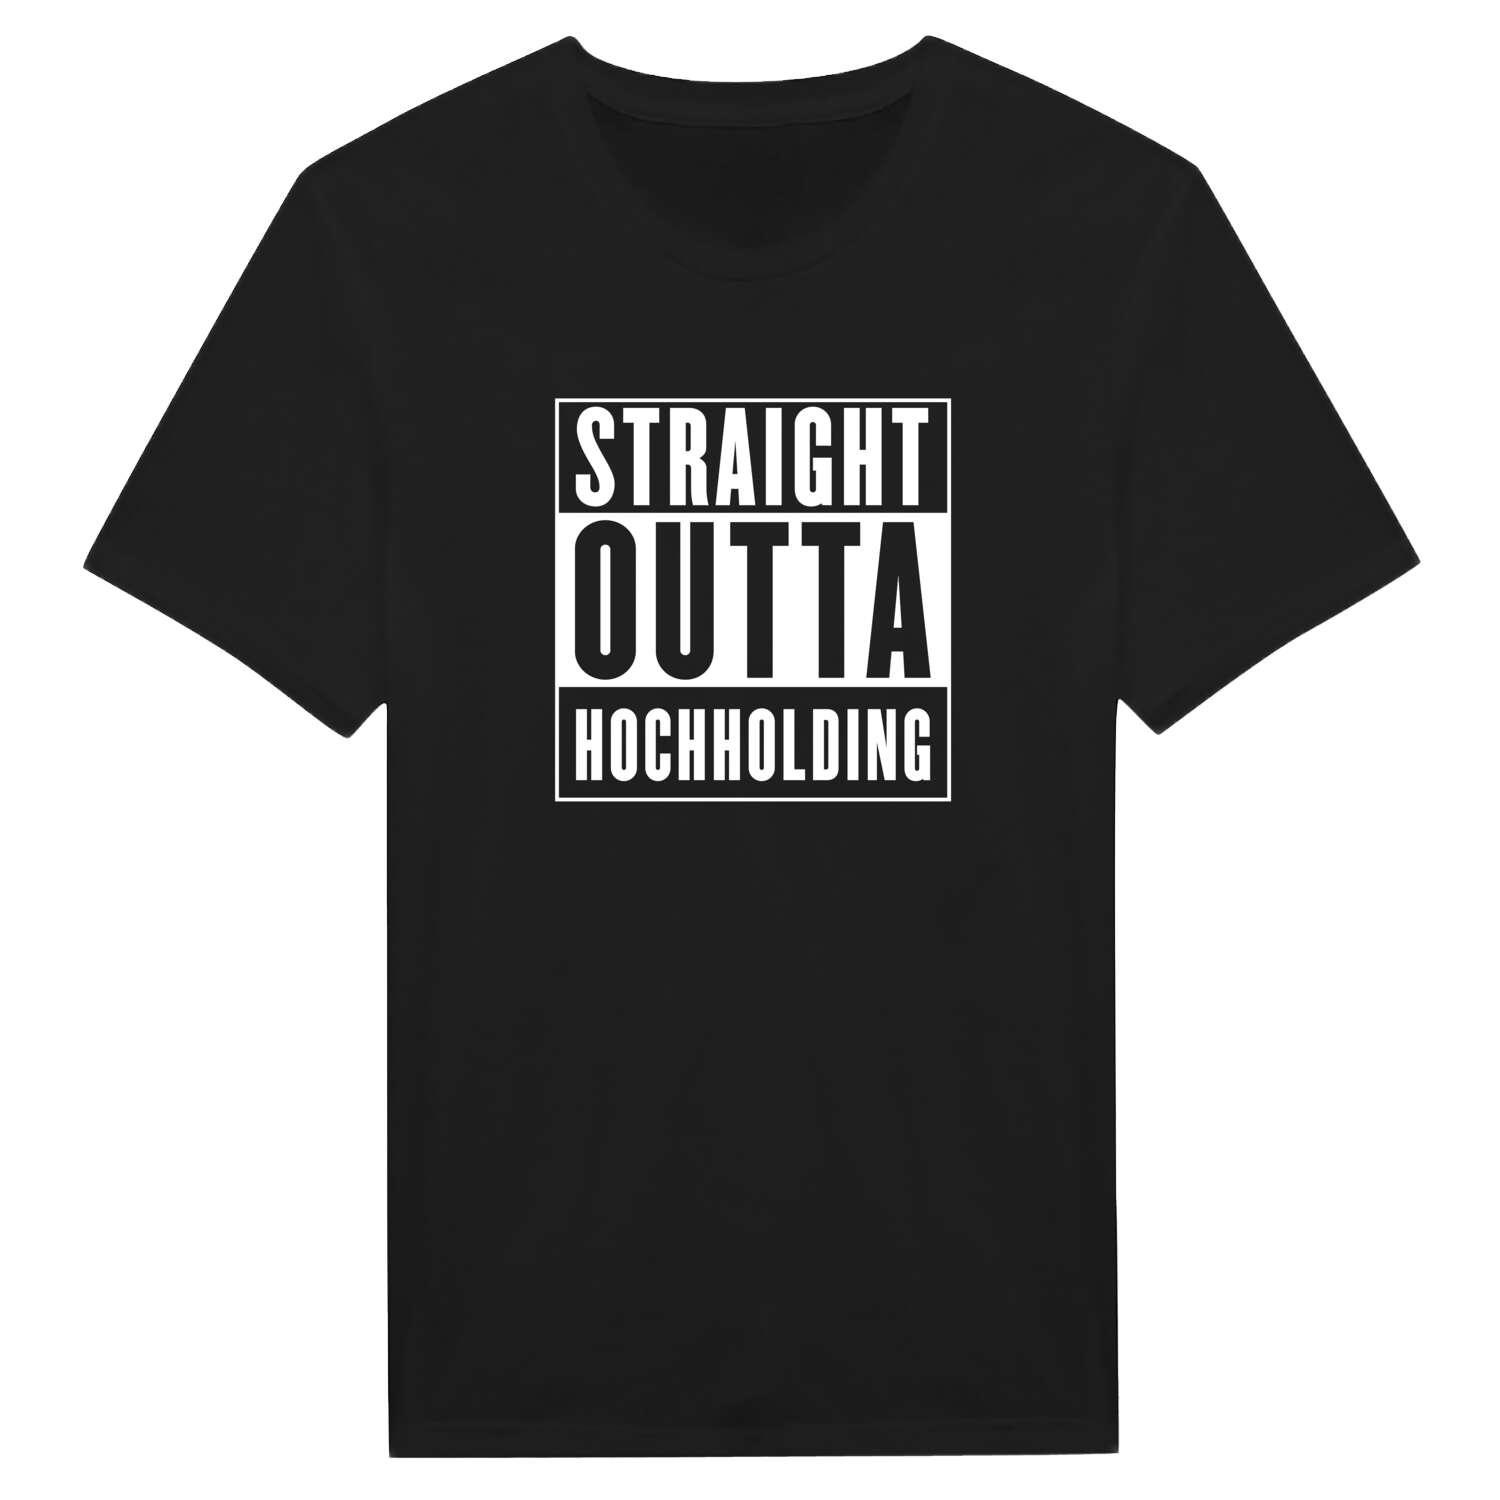 Hochholding T-Shirt »Straight Outta«